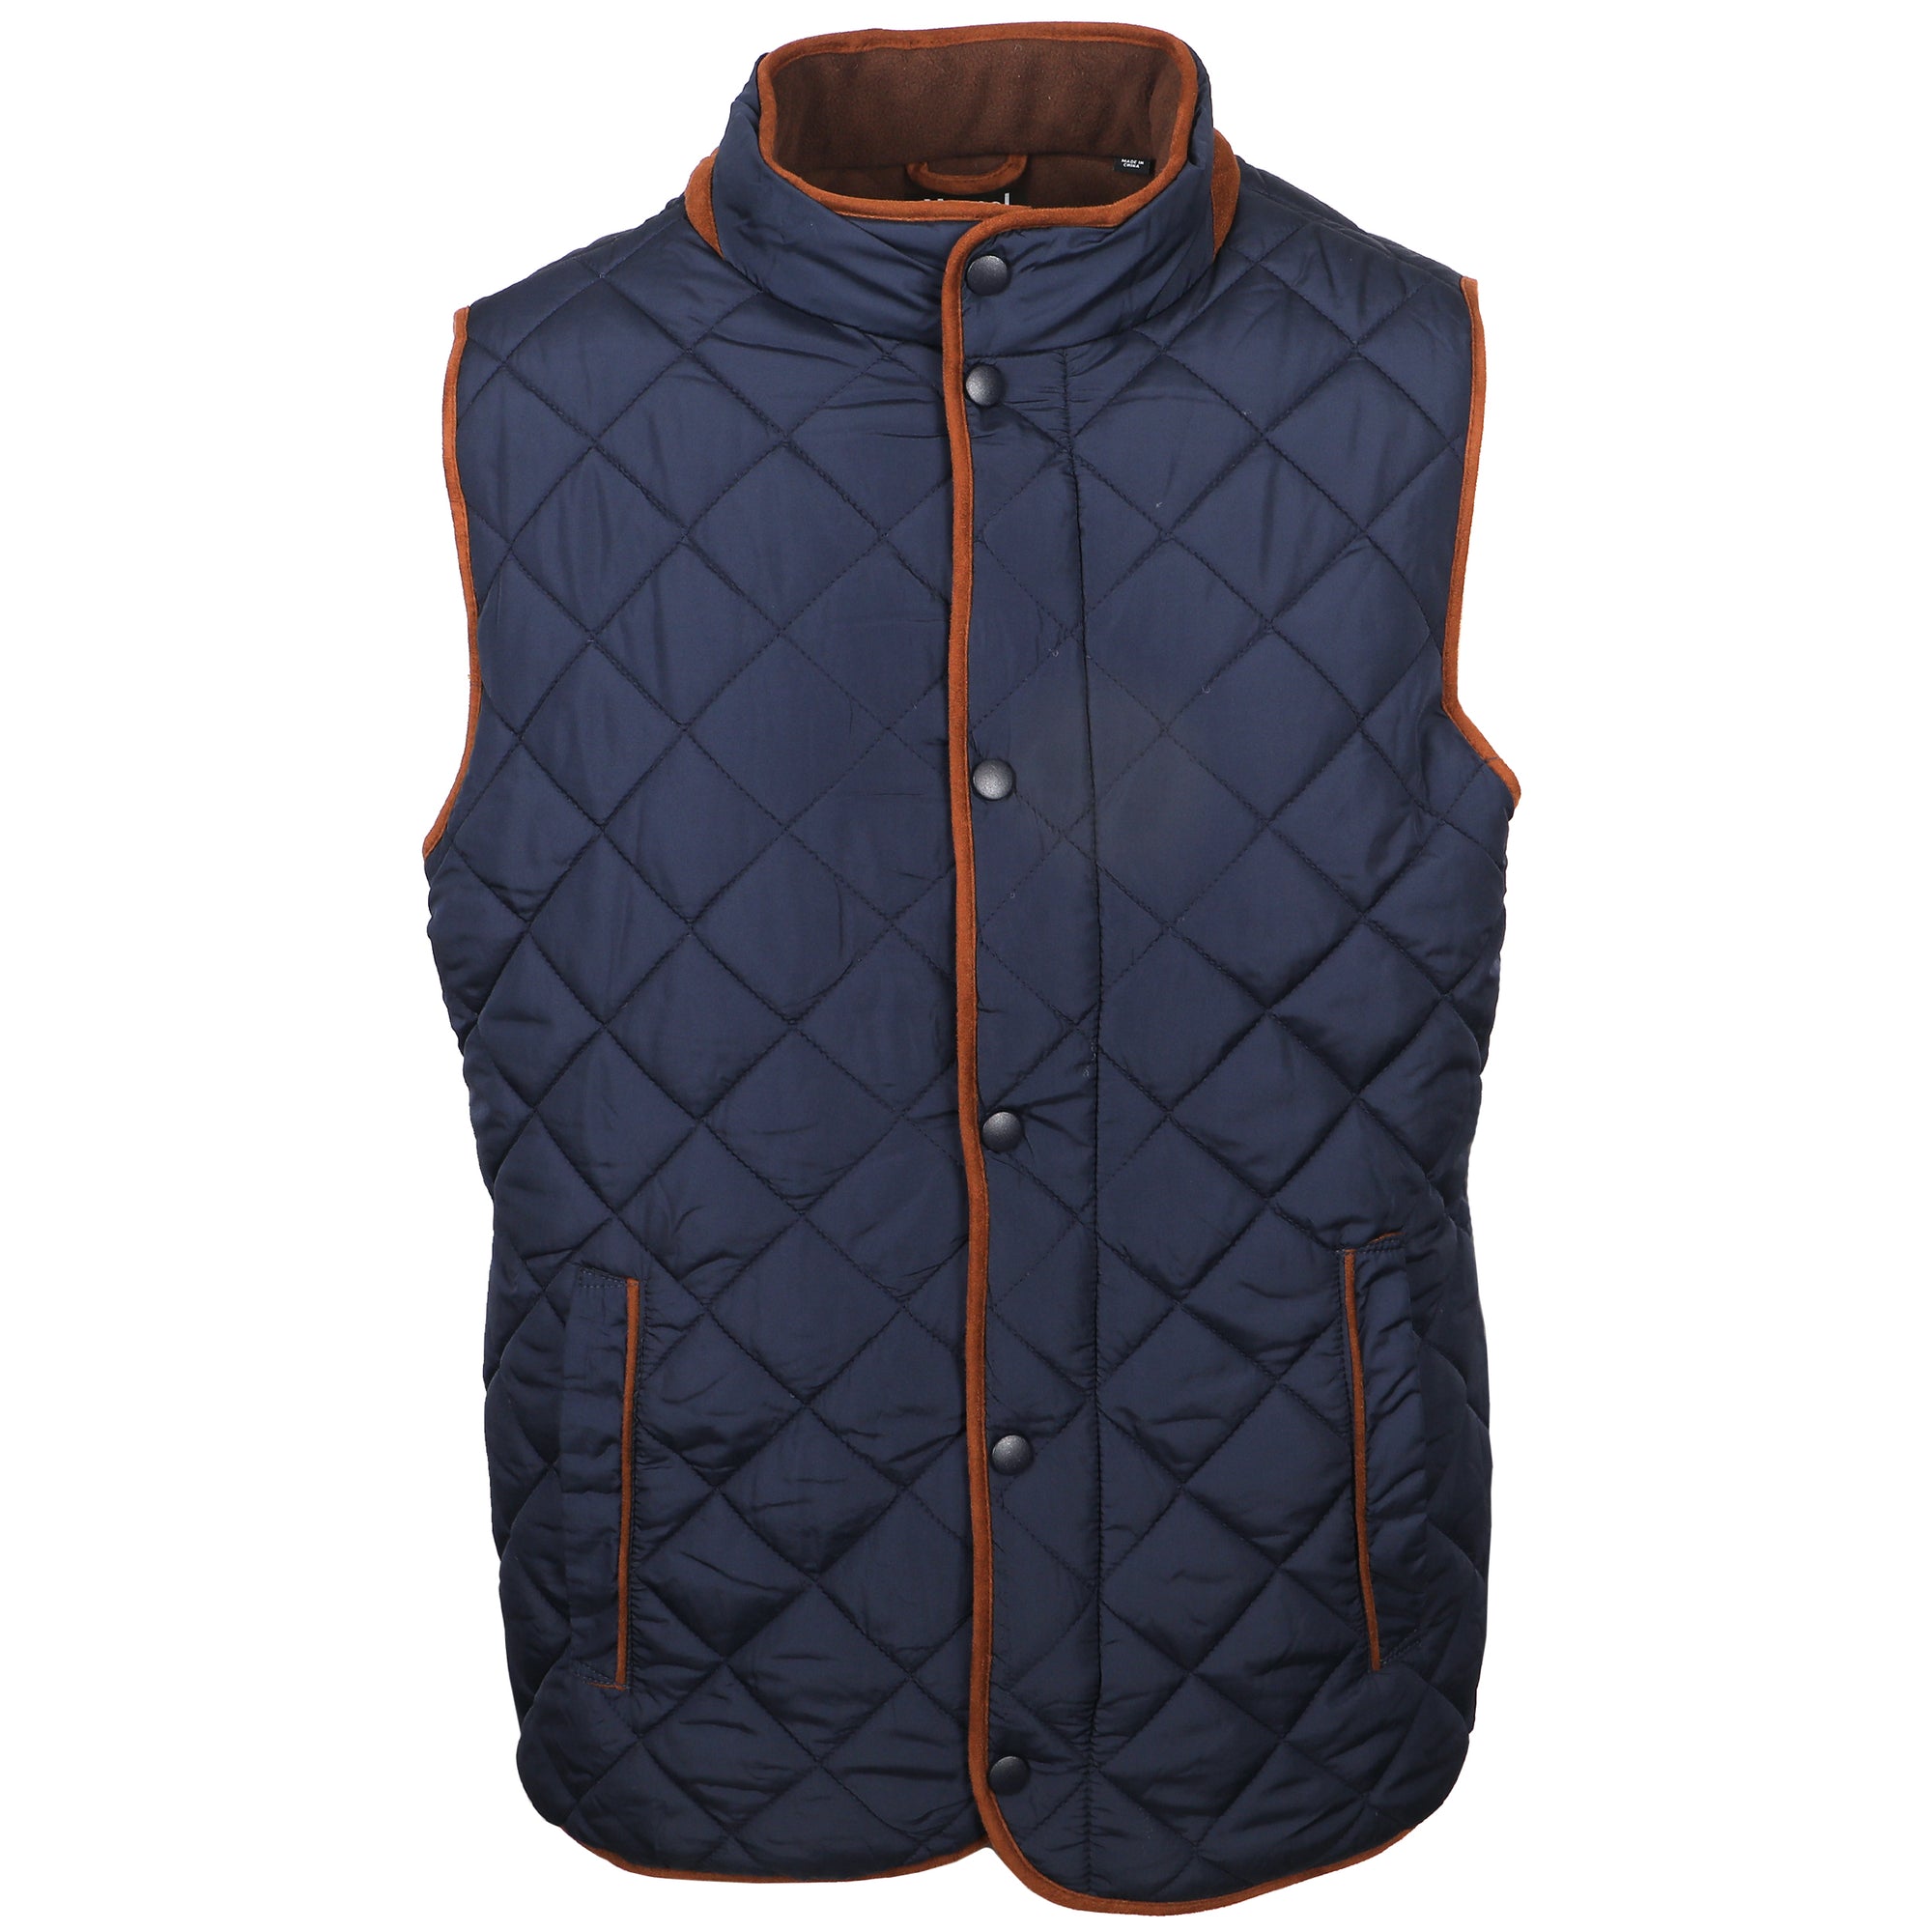 Saturday morning to Saturday night, The Sportsman was designed with interior pockets for all your gear. Get ready for sports and good times!   100% Polyester Vest  •  Quilted Shell & Warm Fleece Interior  •  Full Front Zip with Snap Button Closure  •  Four Inside Pockets  •  Machine Wash - lay flat or hang to dry  •  Imported